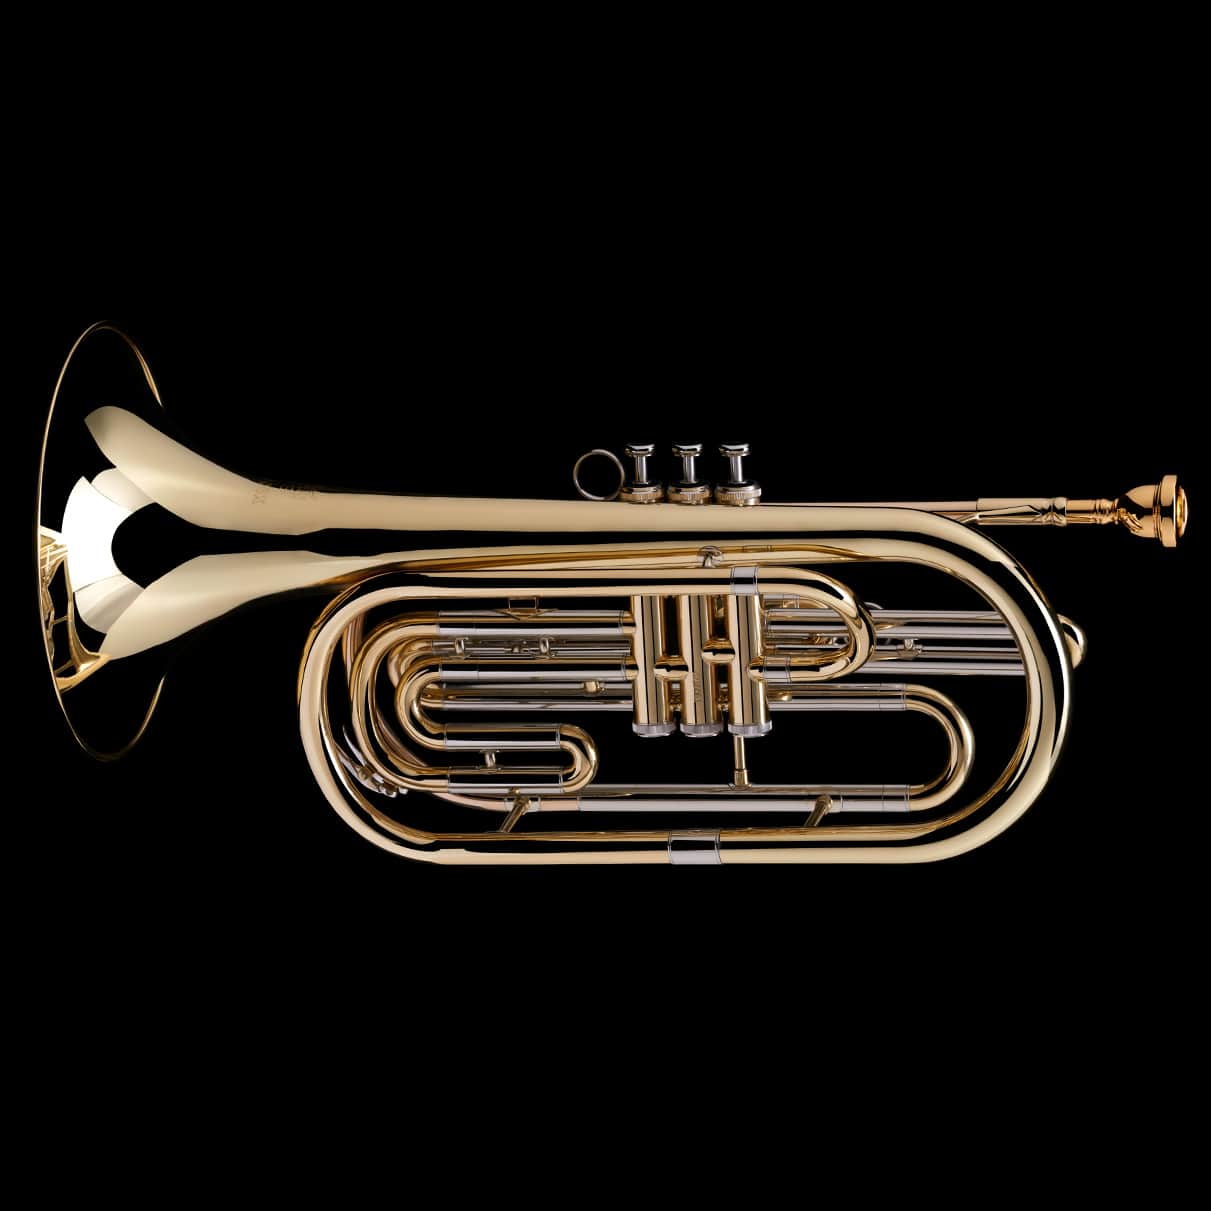 An image of a Bb Flugabone (Marching Trombone) from Wessex Tubas, facing left